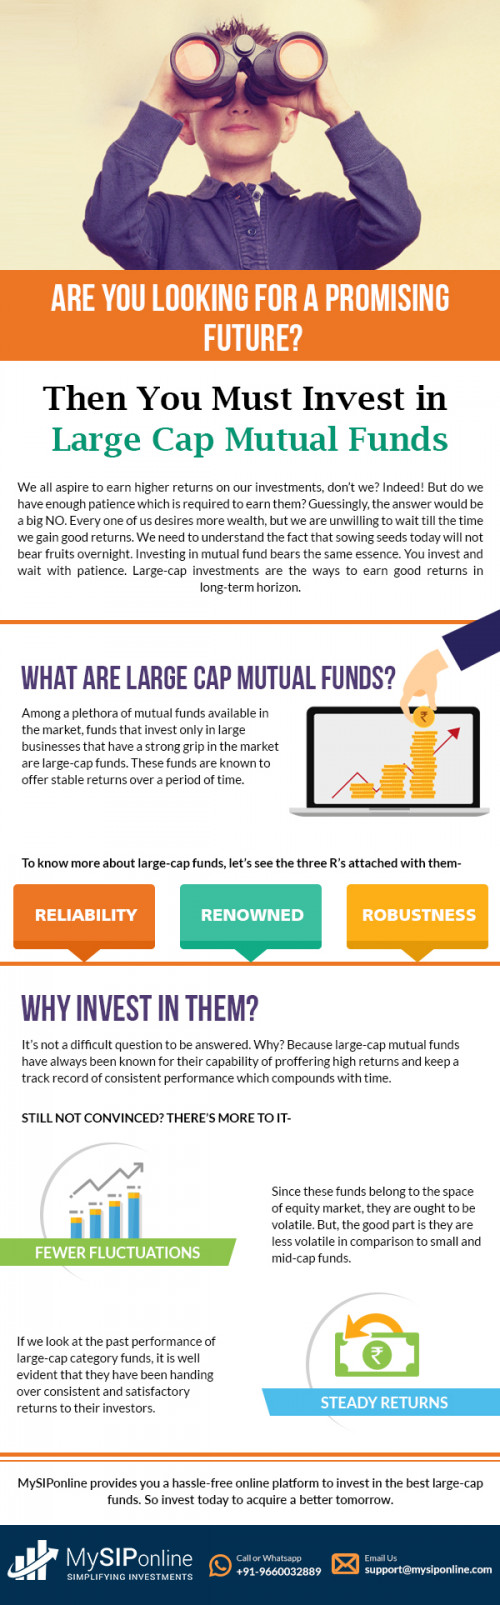 Begin your investment in large cap mutual funds and enjoy your life. Plan your mutual funds  investments and grab complete details about larg cap funds under guidance of experts available at MySIPonline at https://www.mysiponline.com/mutual-funds/large-cap